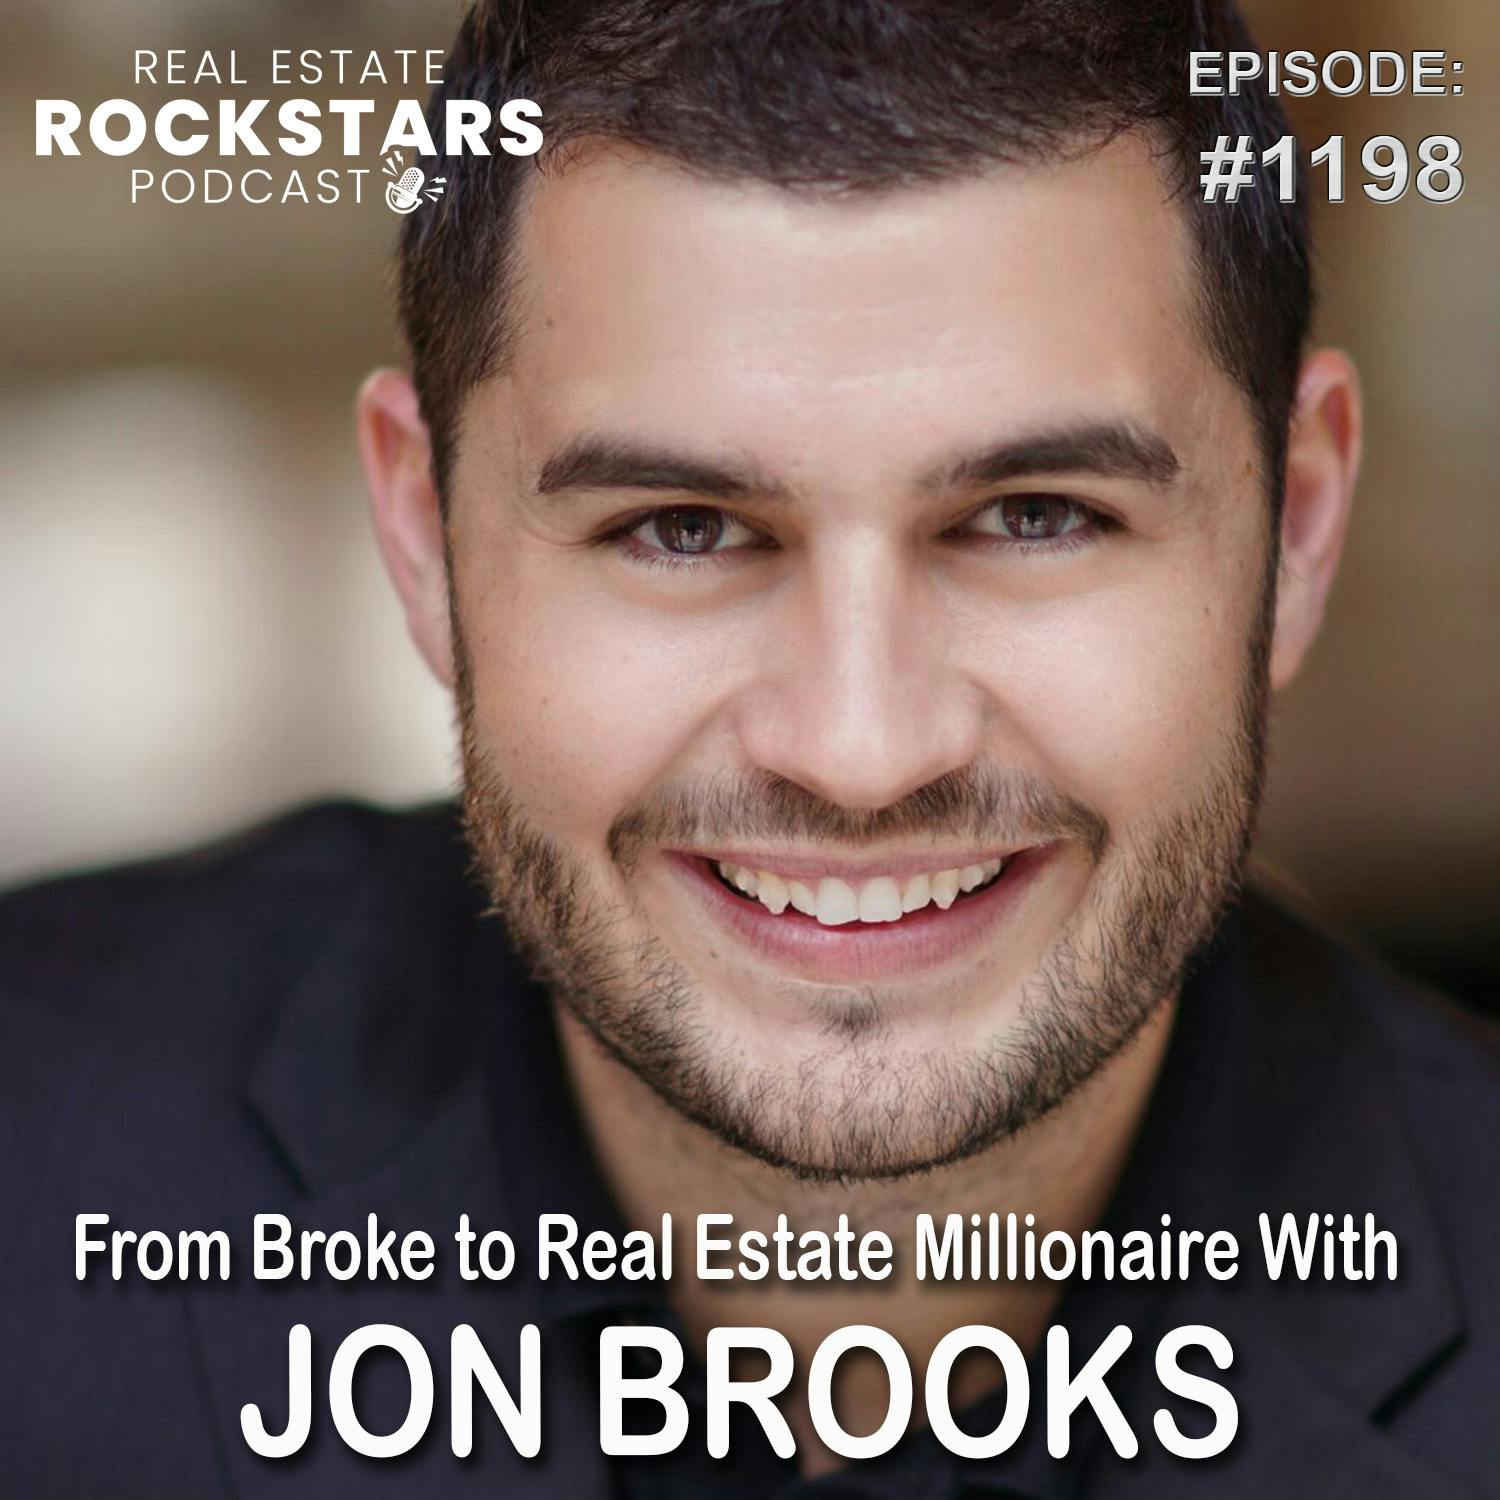 1198: From Broke to Real Estate Millionaire With Jon Brooks